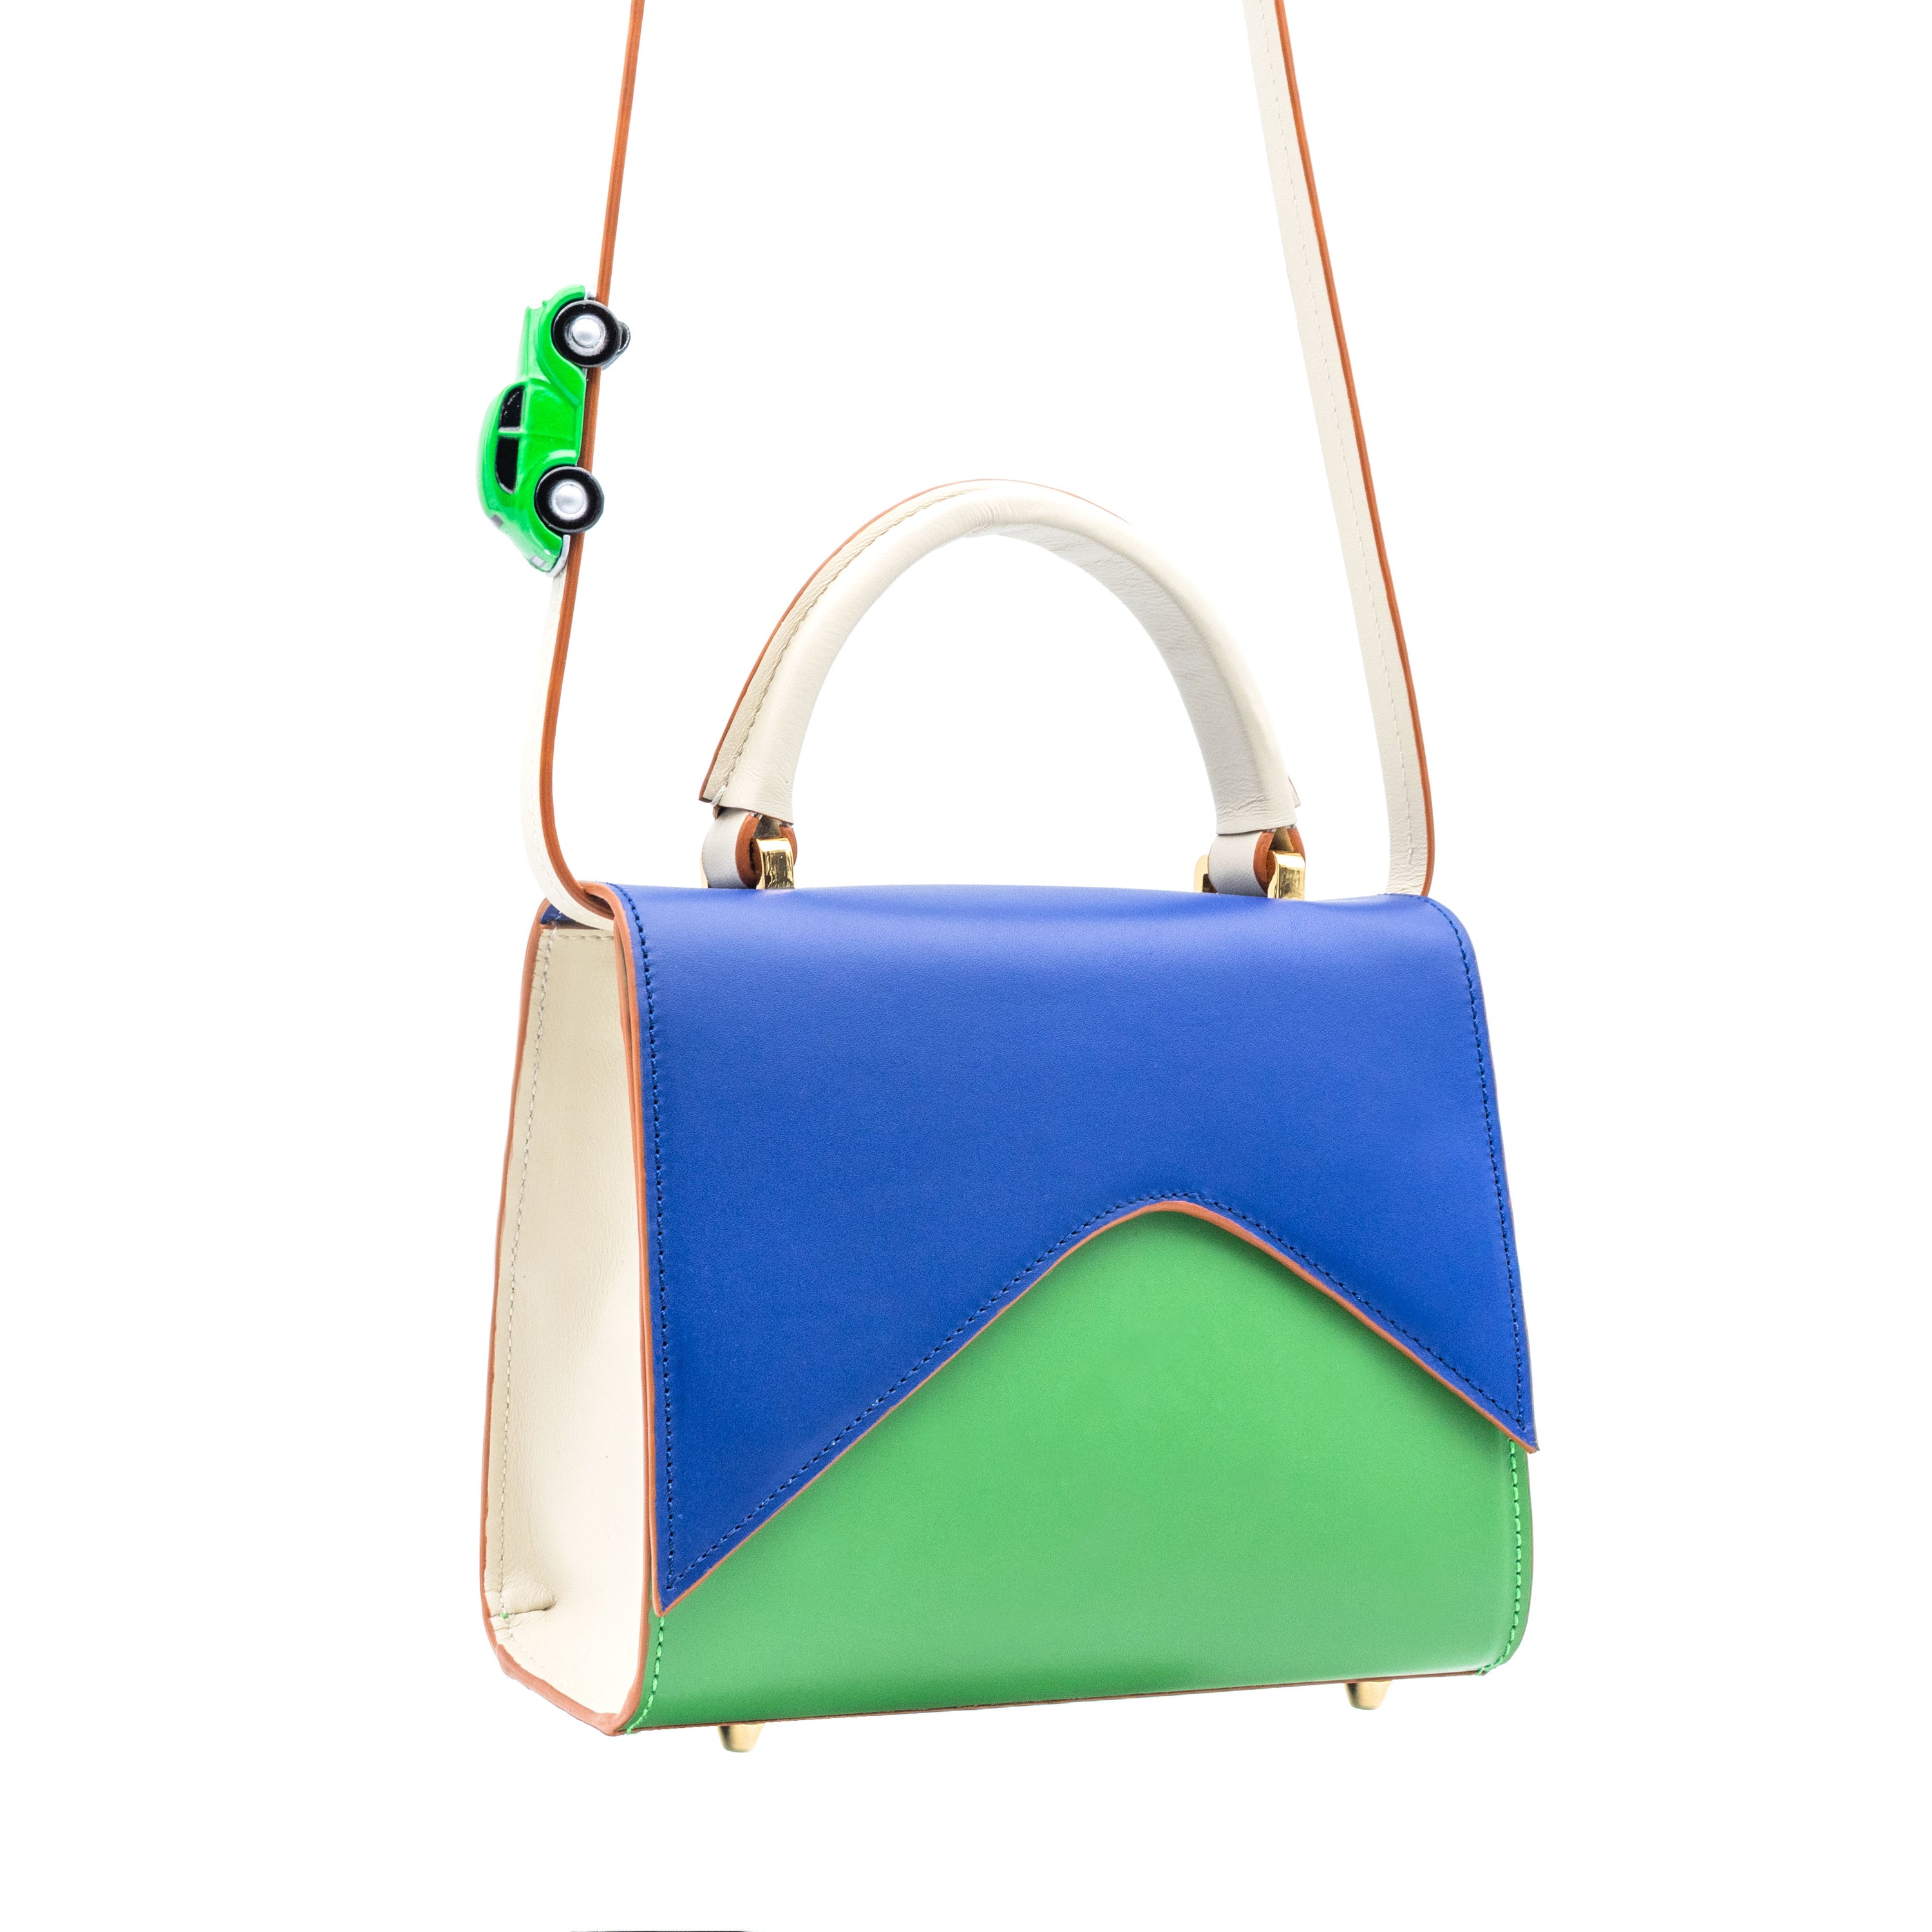 MOUNTAIN ROAD Navy and green small leather shoulder bag